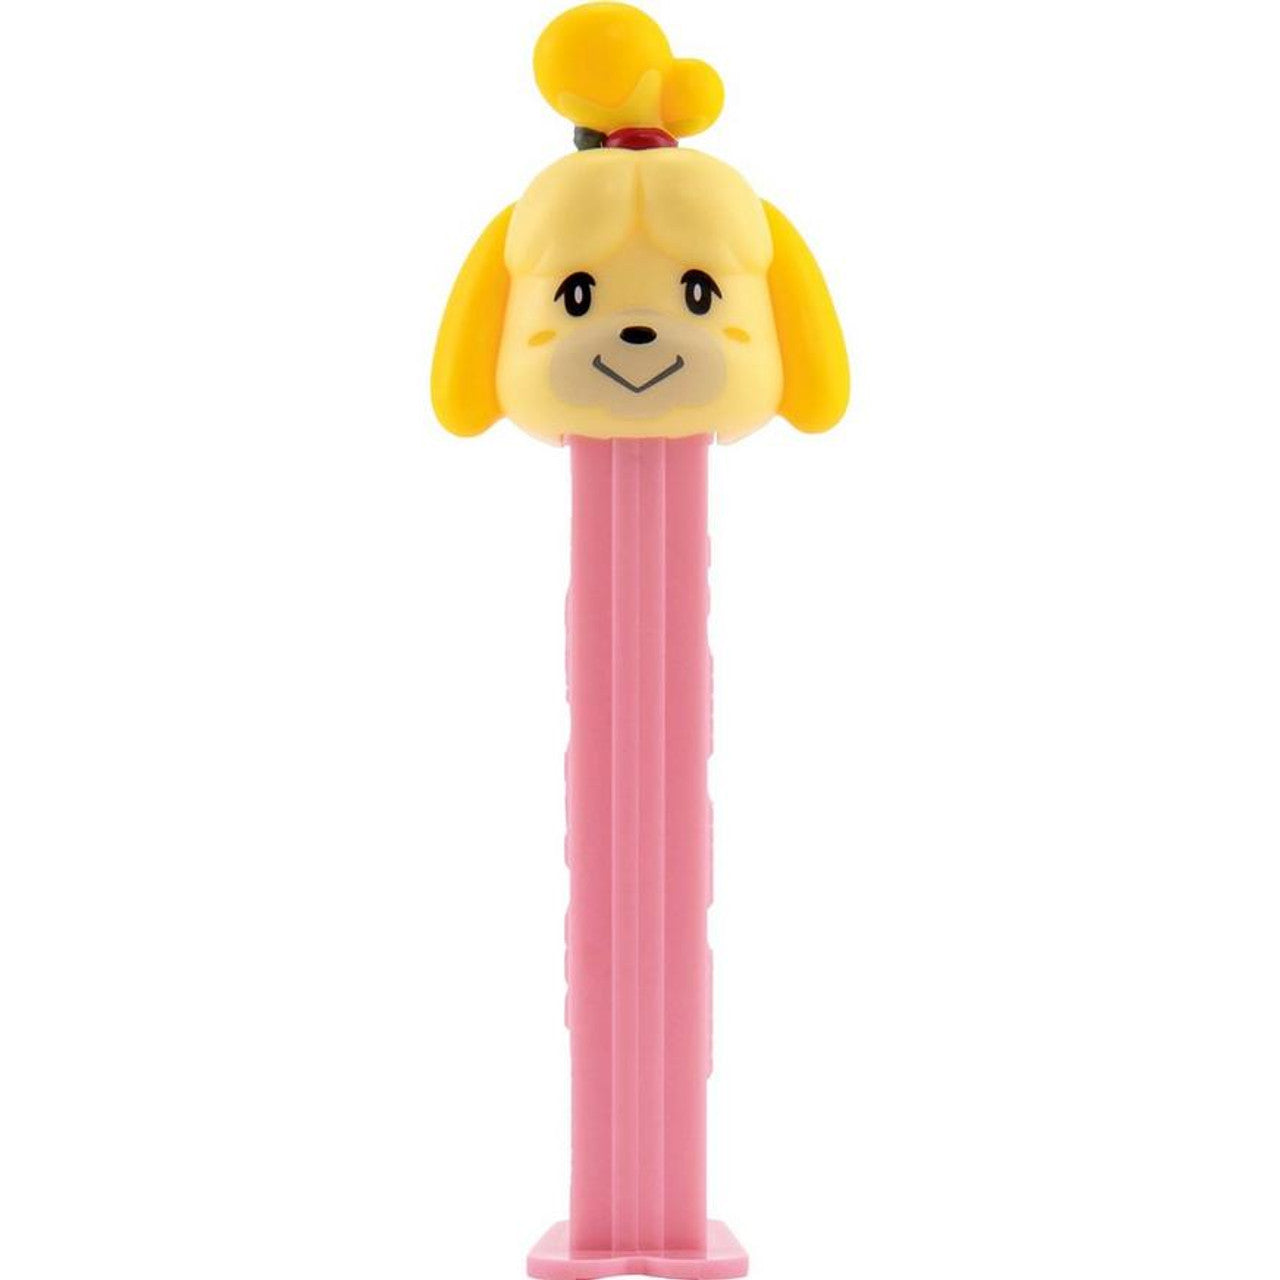 PEZ - PEZ: Animal Crossing - Blister Pack Assorted Display (12)